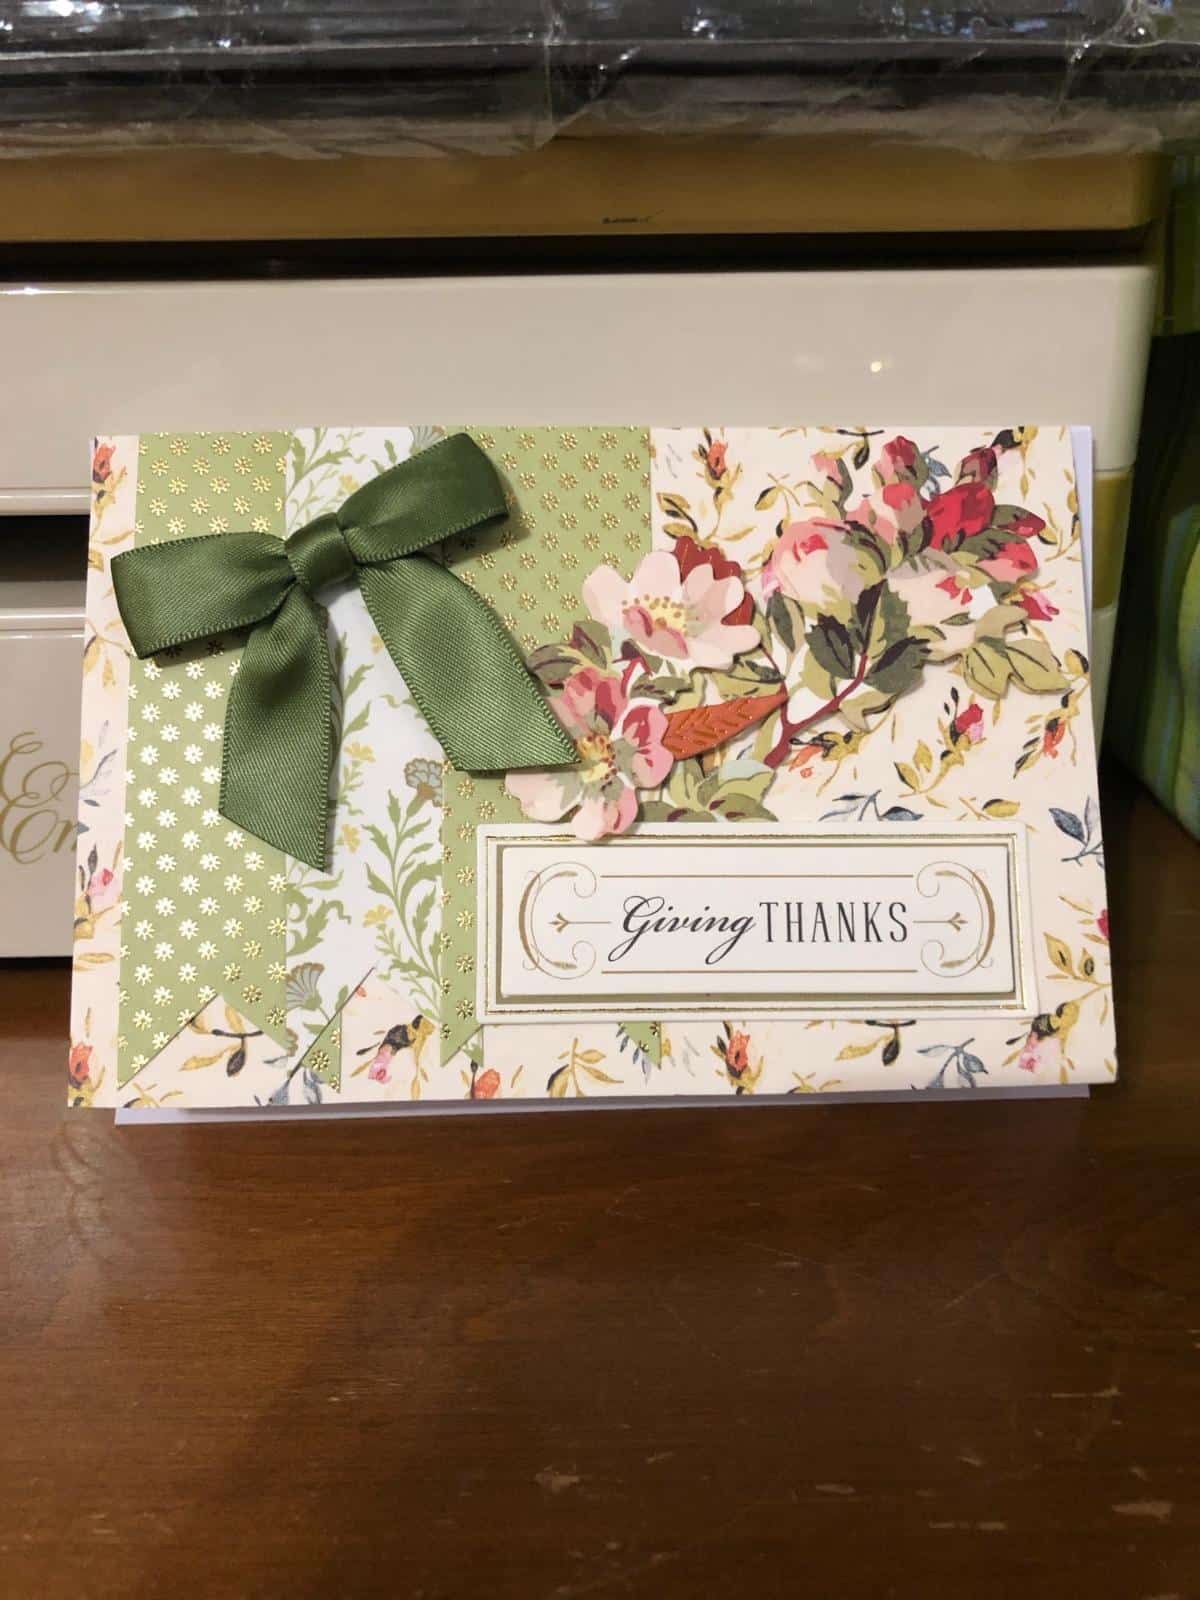 A thank you card with a green bow on it.